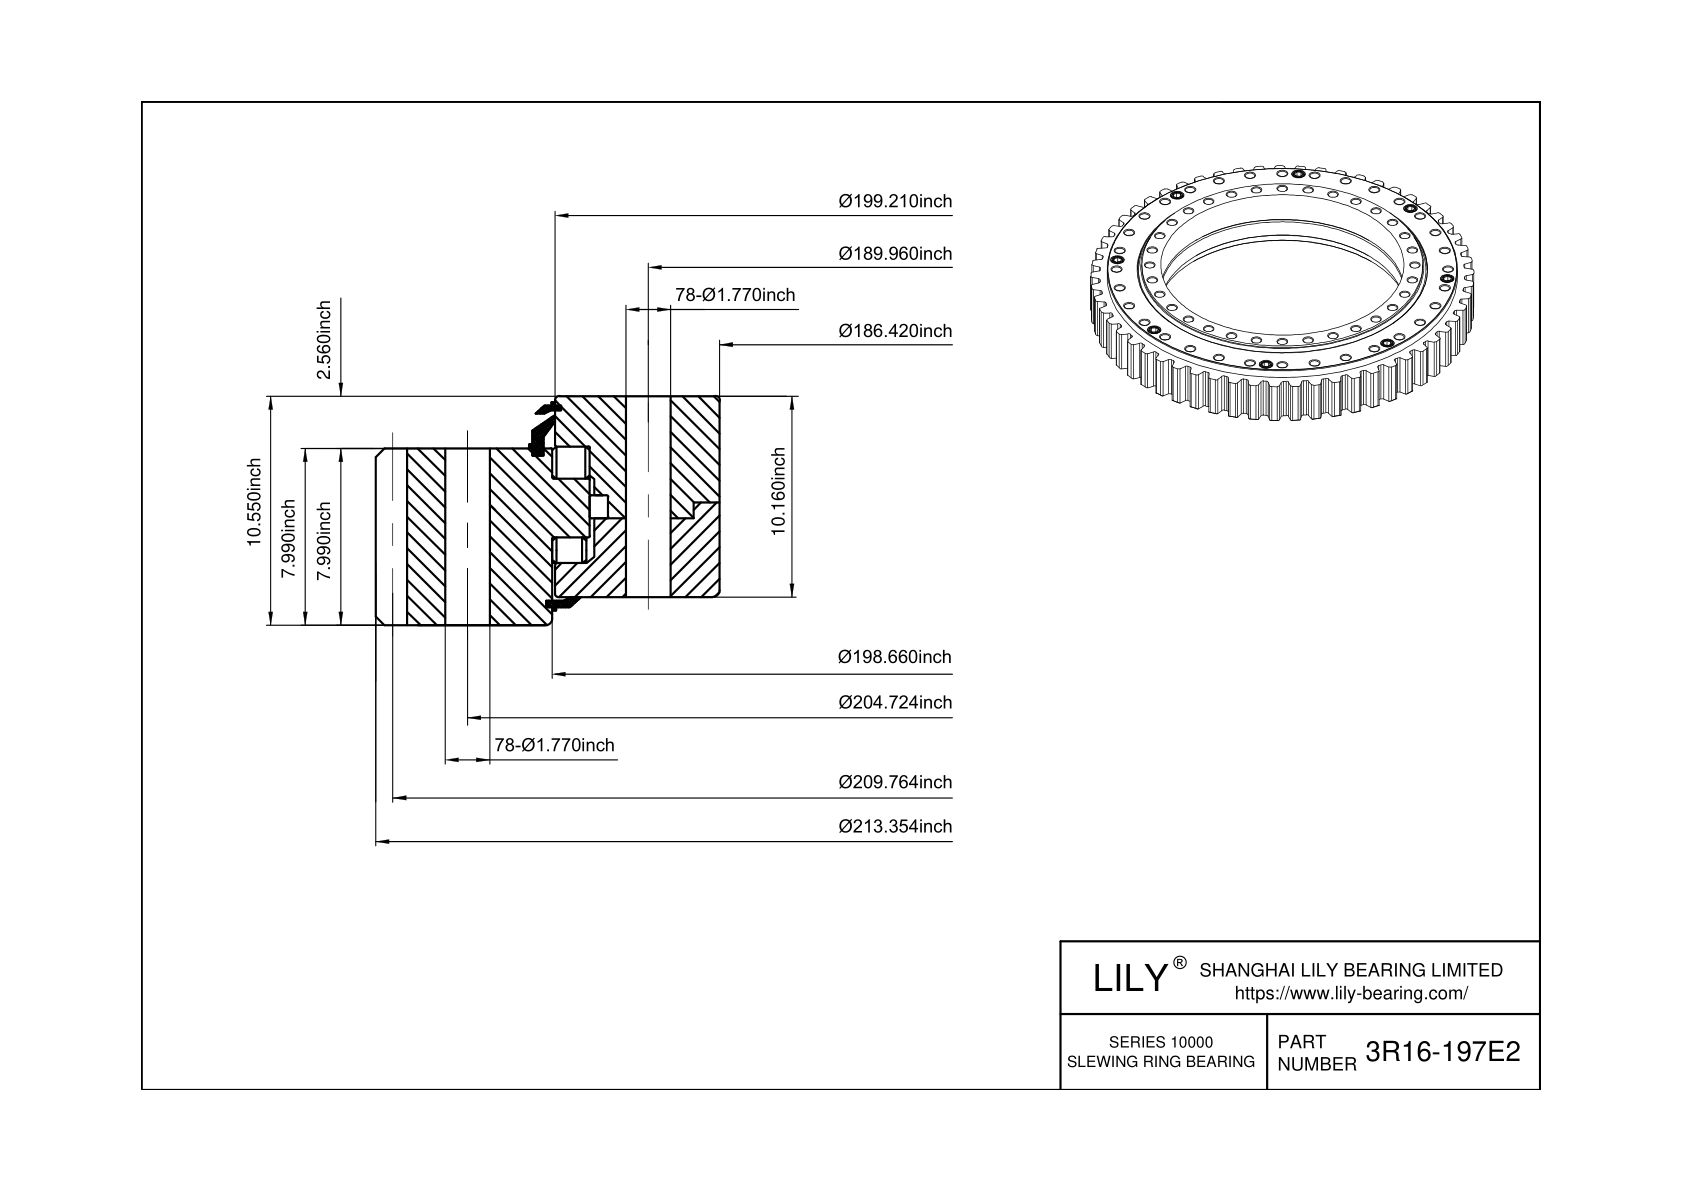 3R16-197E2 Three-Row Cross Roller Slewing Ring Bearing cad drawing